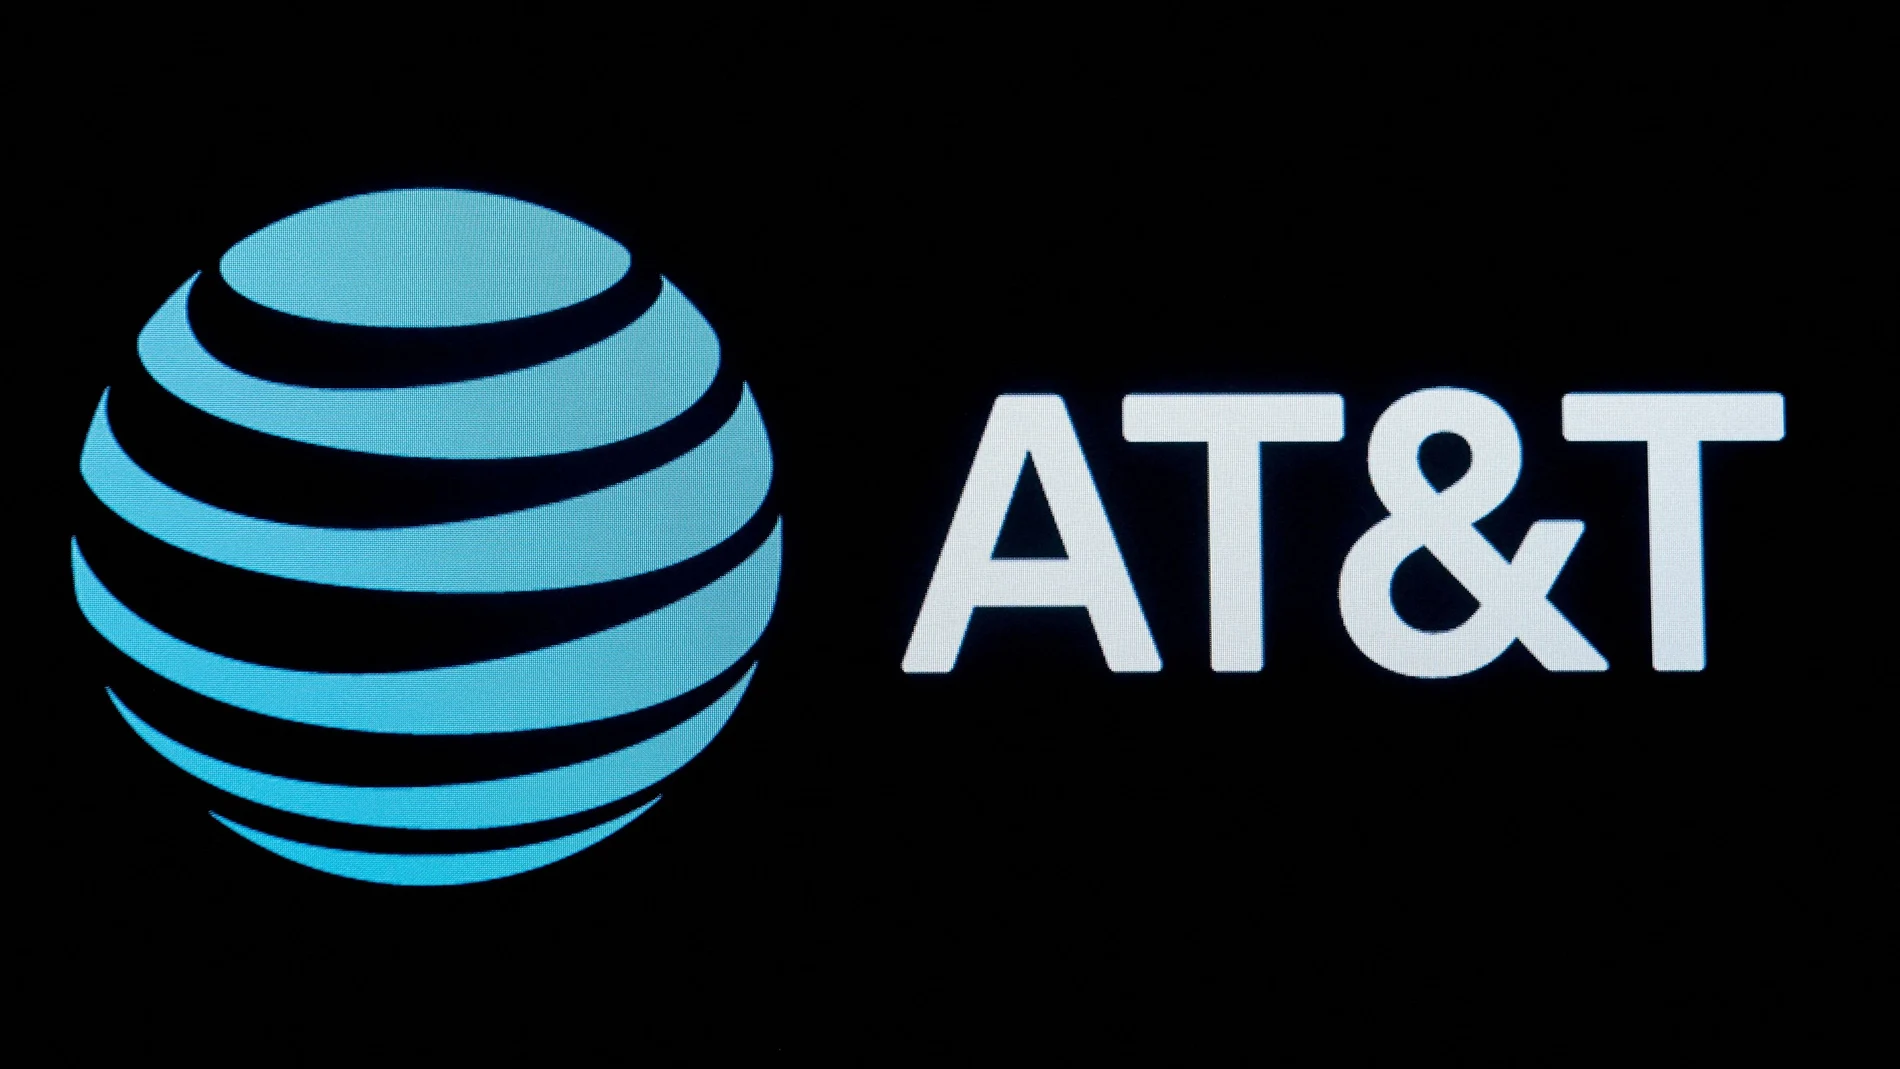 FILE PHOTO: The company logo for AT&T is displayed on a screen on the floor at the New York Stock Exchange (NYSE) in New York, U.S., September 18, 2019. REUTERS/Brendan McDermid/File Photo